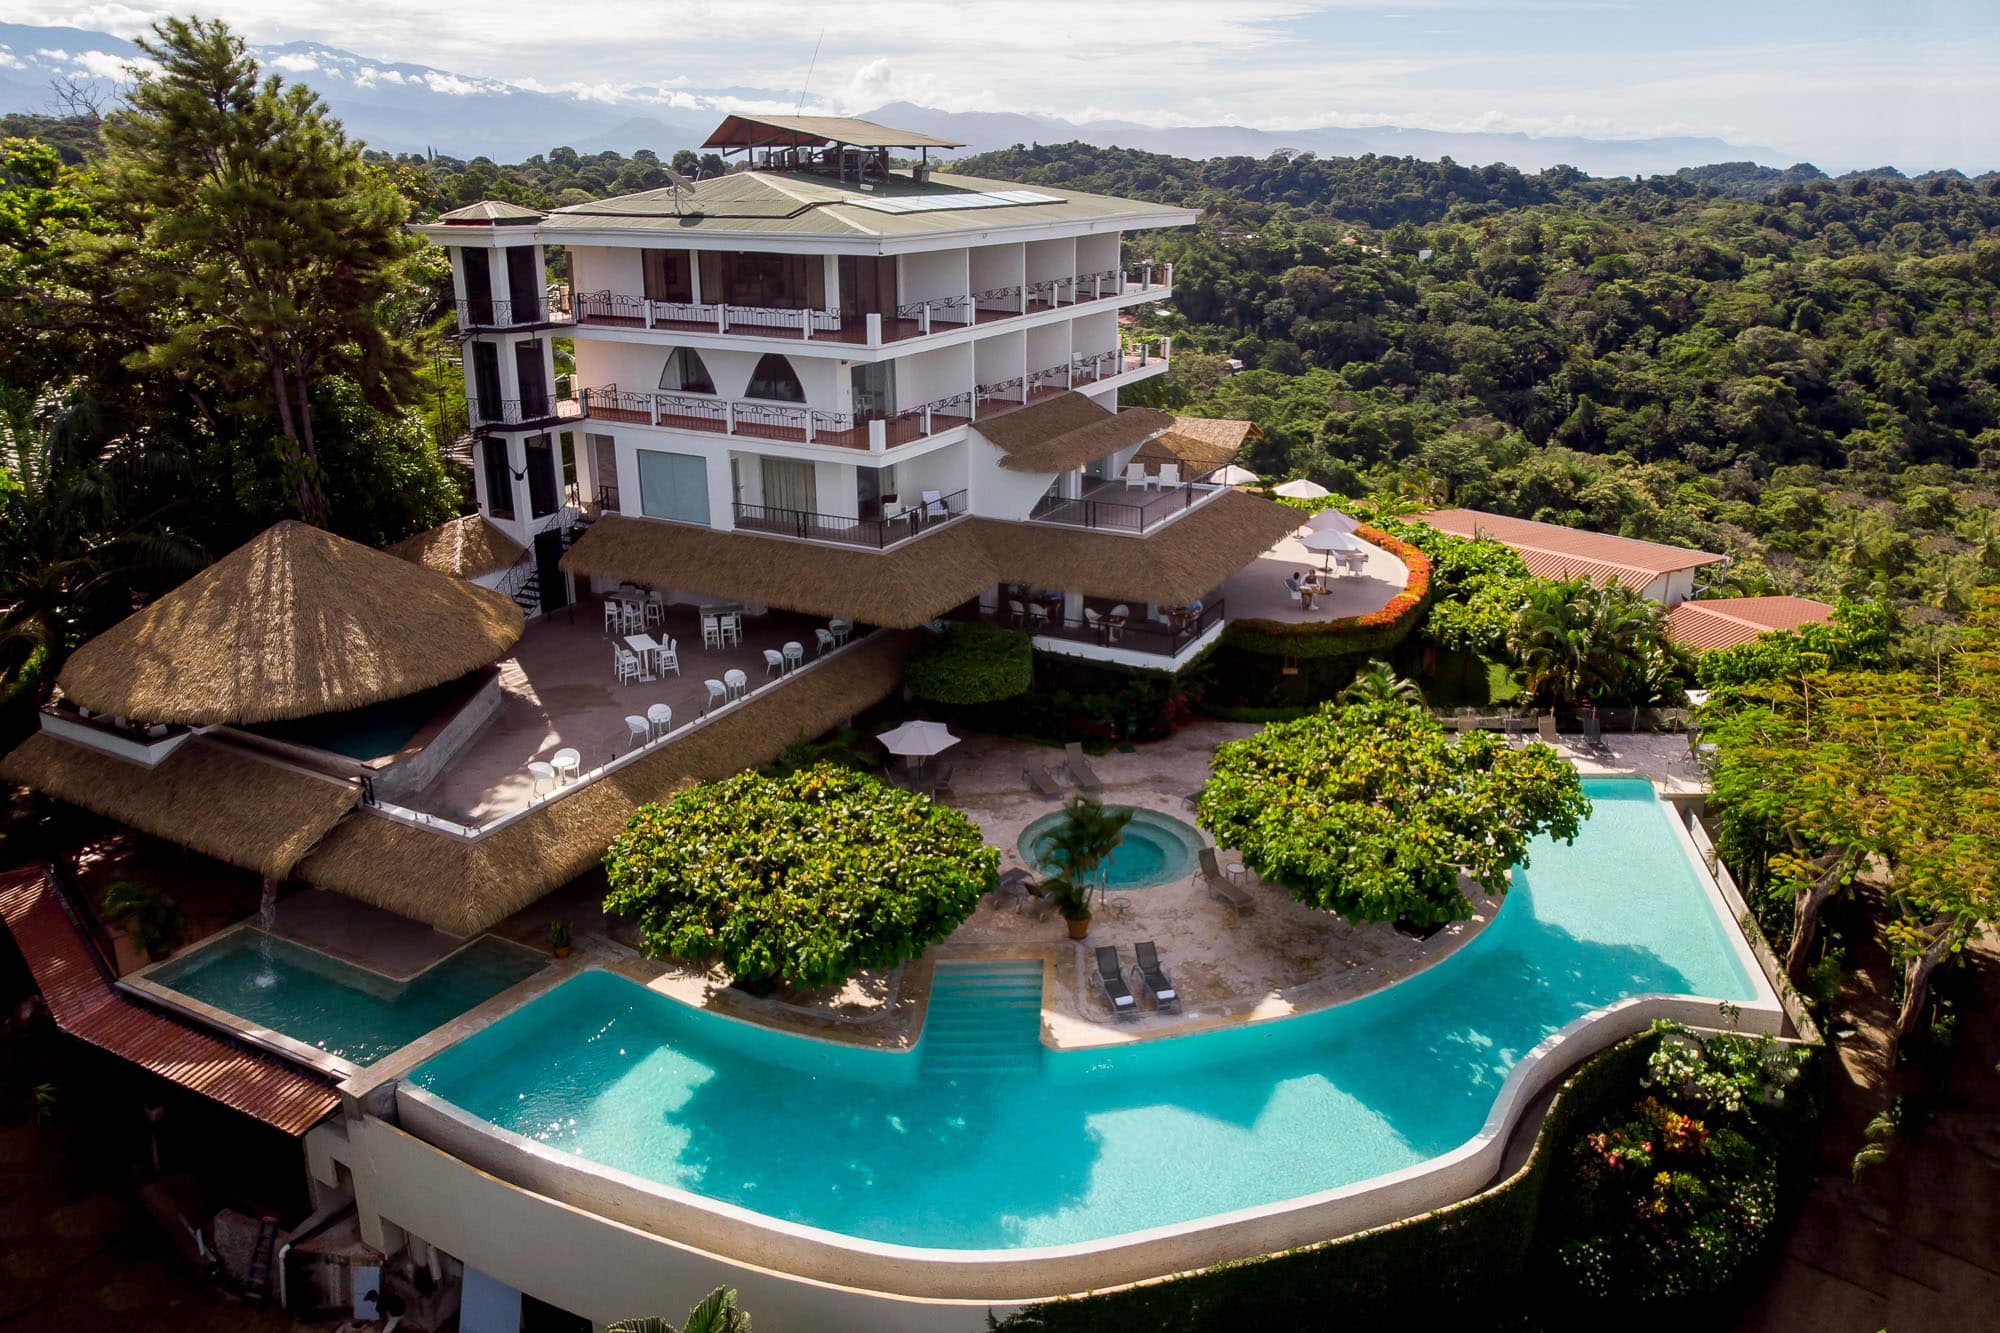 view from the sky of La mariposa hotel with wraparound infinity pool